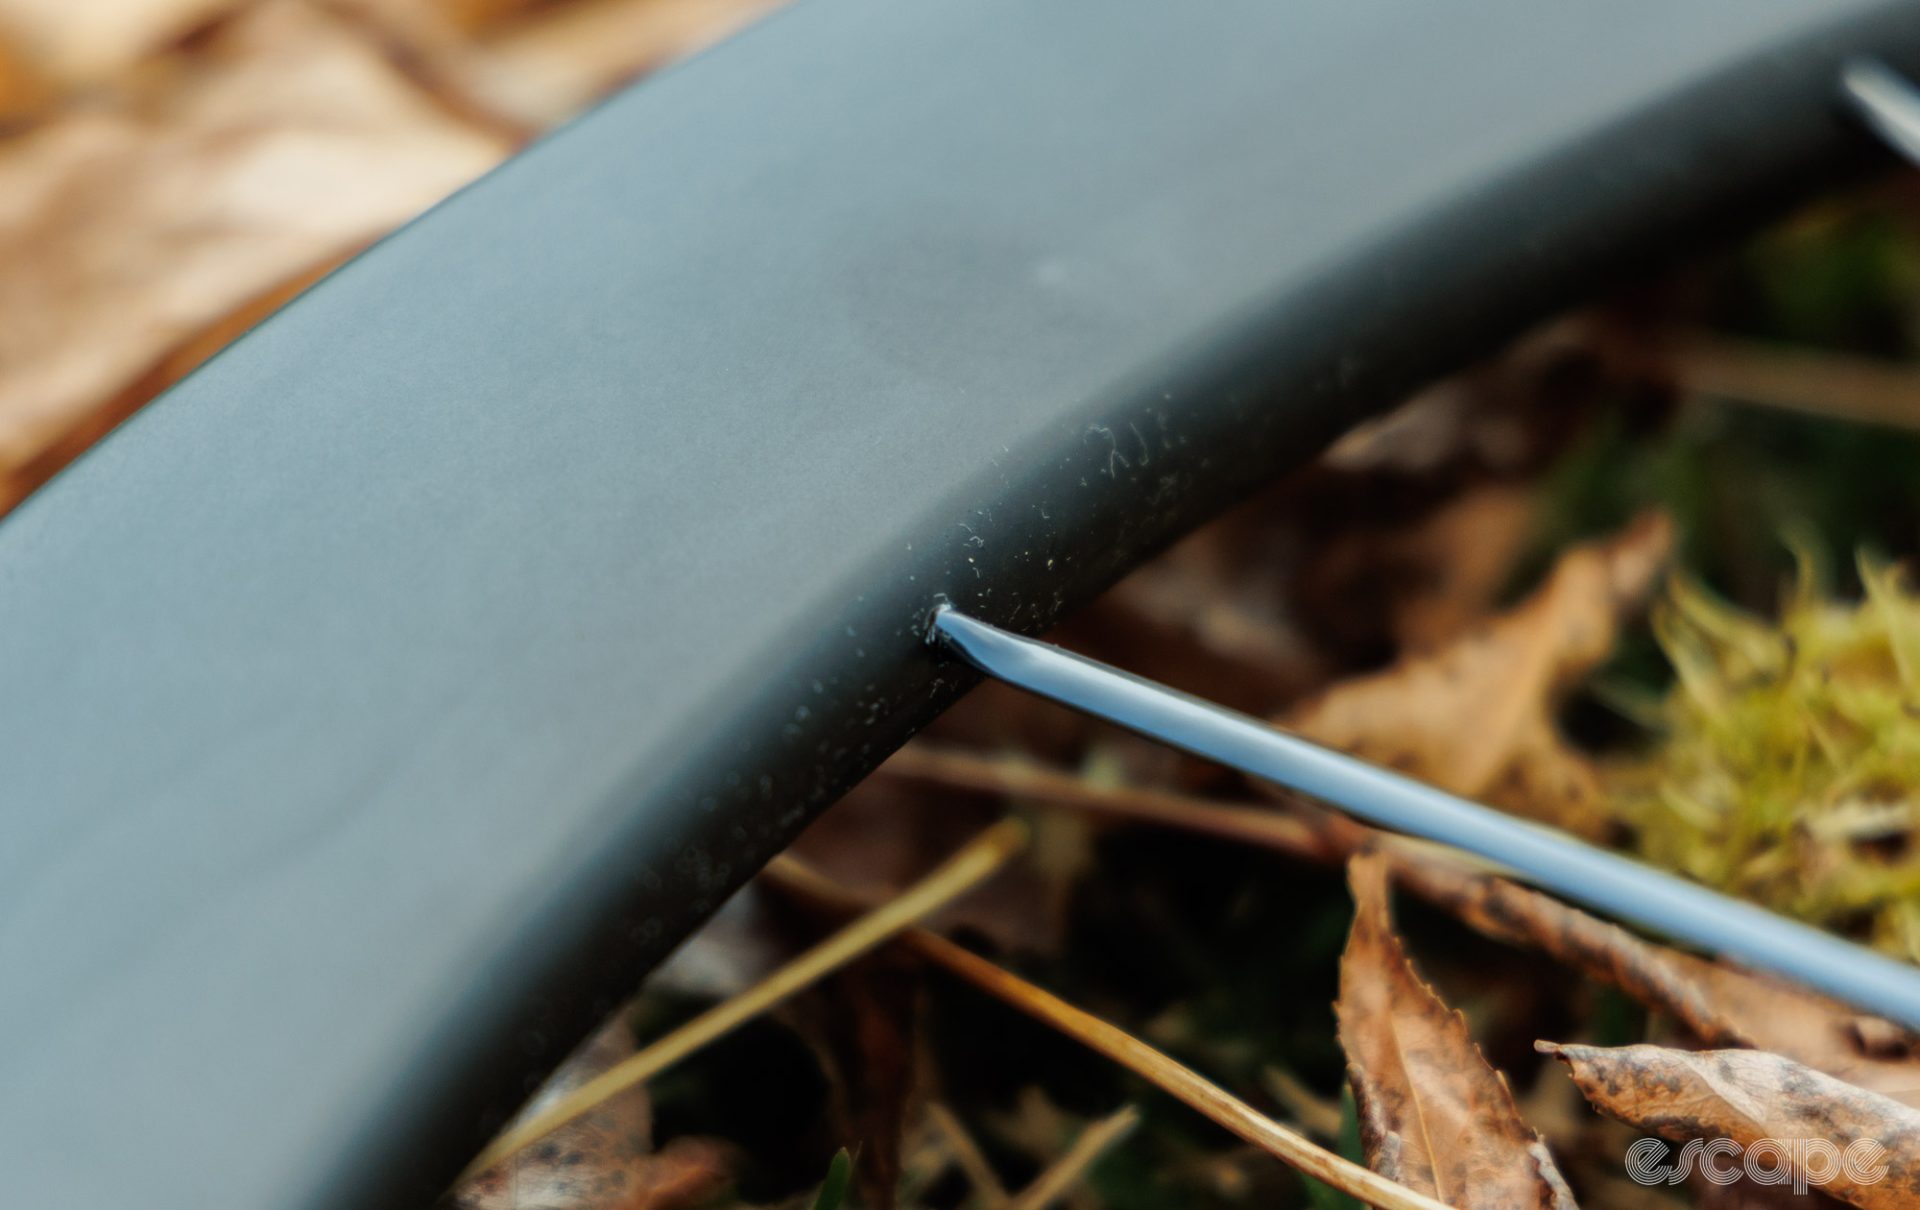 A closeup of the spoke and rim connection; the spokes are bonded to the rim, with no nipple to adjust tension or offer easy replacement options.